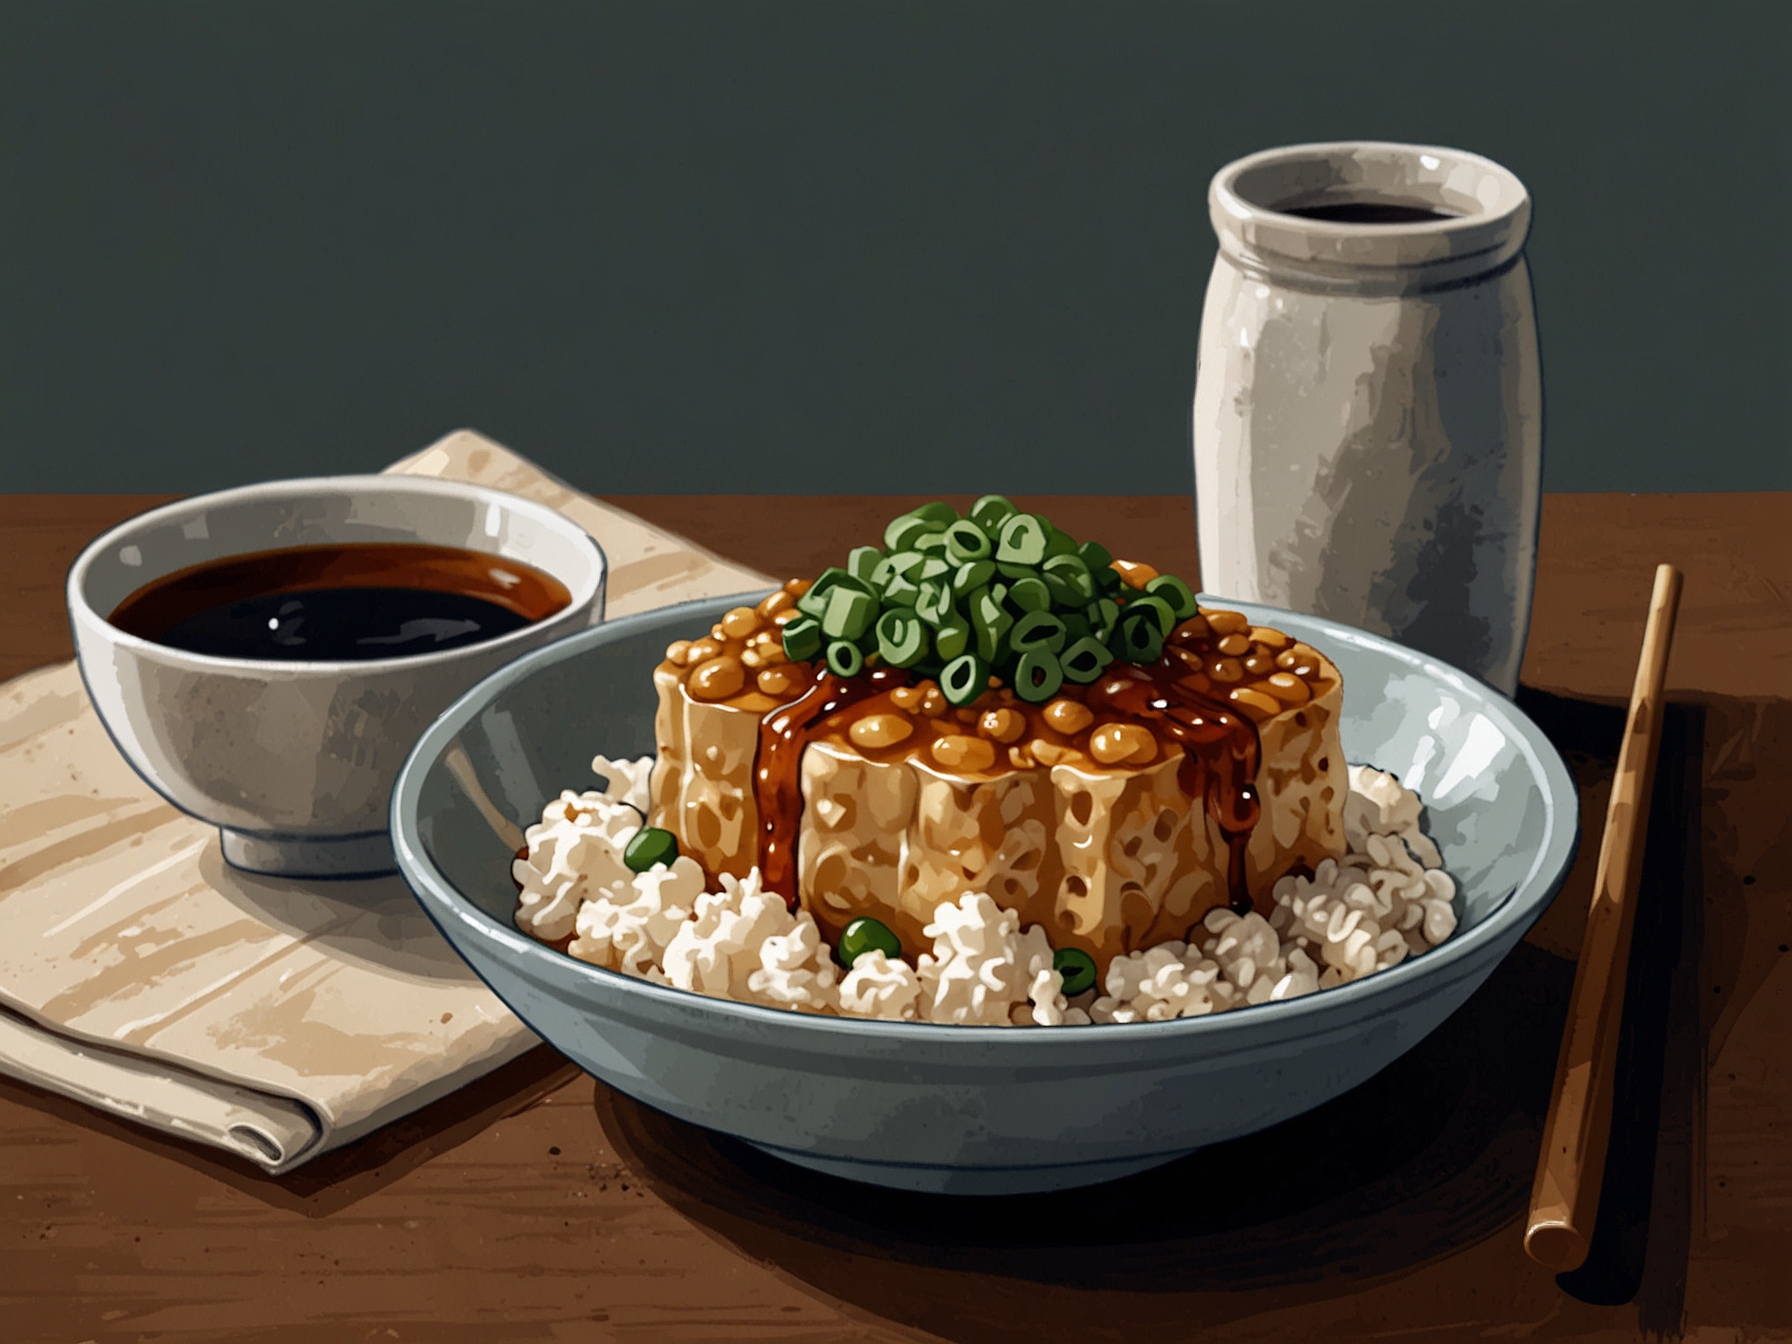 A traditional Japanese breakfast featuring natto served over steamed rice, garnished with chopped green onions, soy sauce, mustard, and shredded nori, showing its culinary versatility.